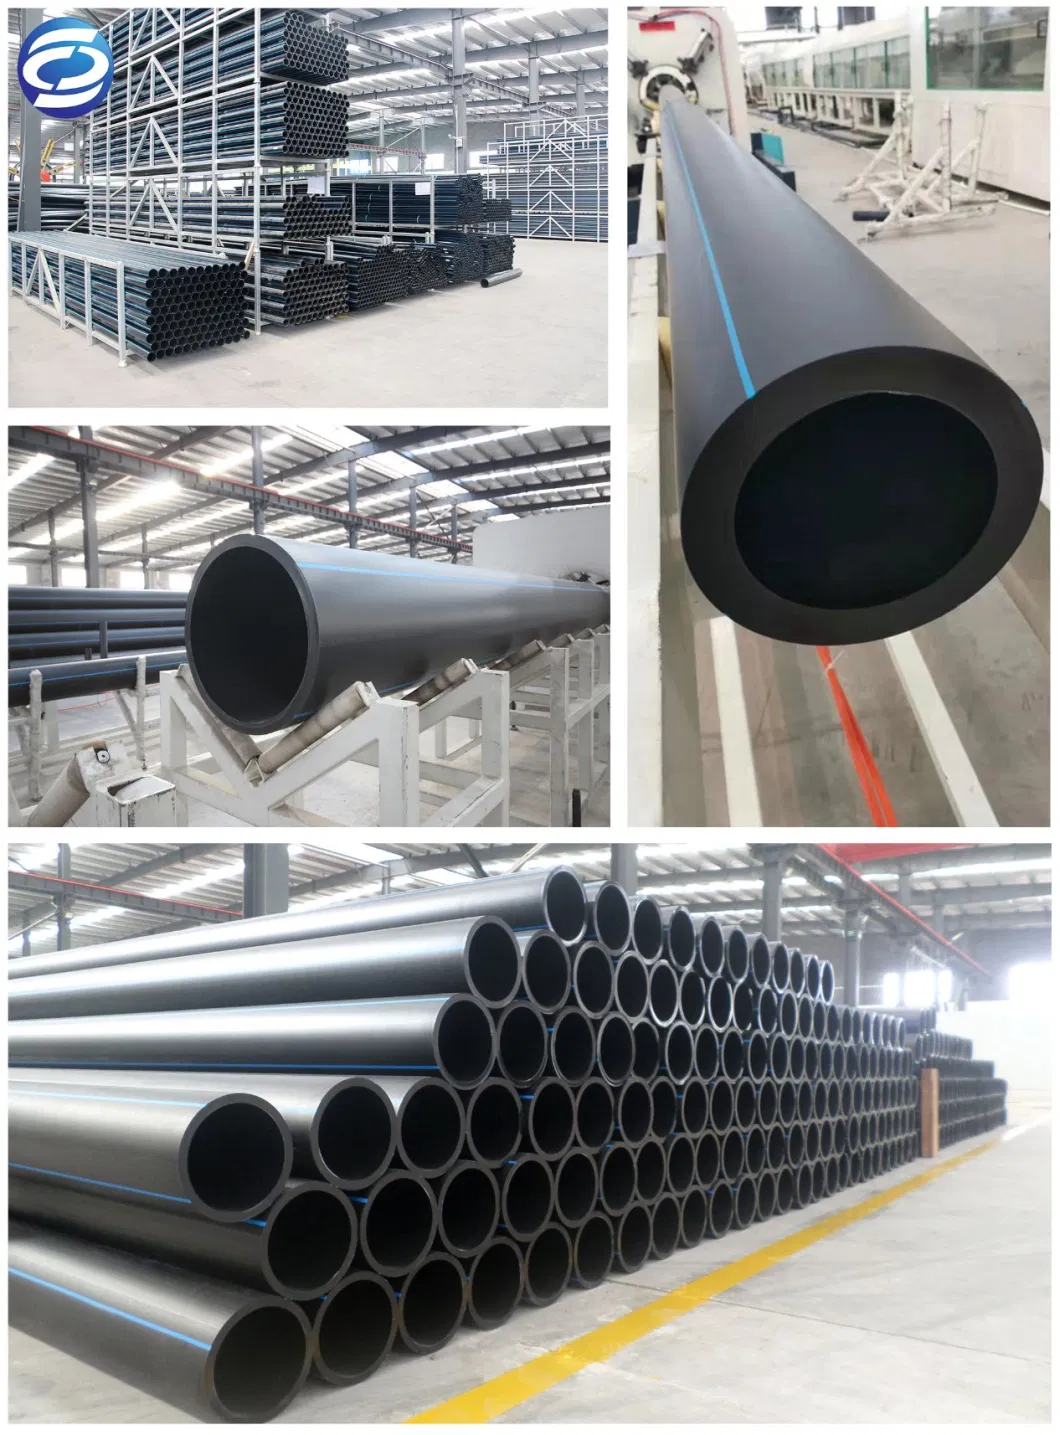 Hot Sell PE Pipe Plastic Tube Plastic Pipe HDPE Pipe for Water Gas Sewer Slurry Transfer Line Rural Irrigation Fire System Supply Line